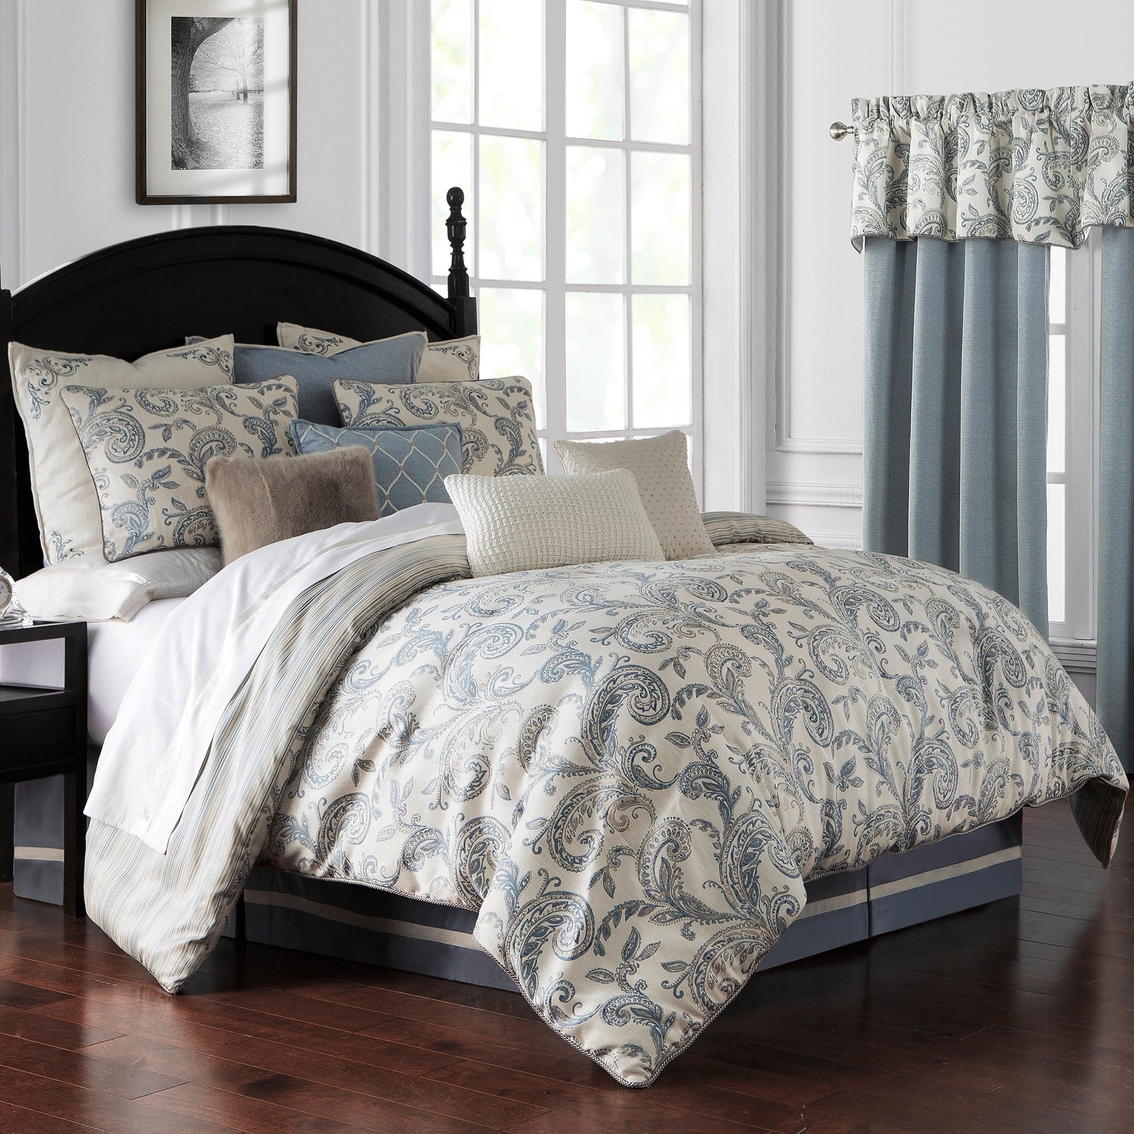 Waterford Florence Chambray Blue Duvet Set - Image 3 of 4